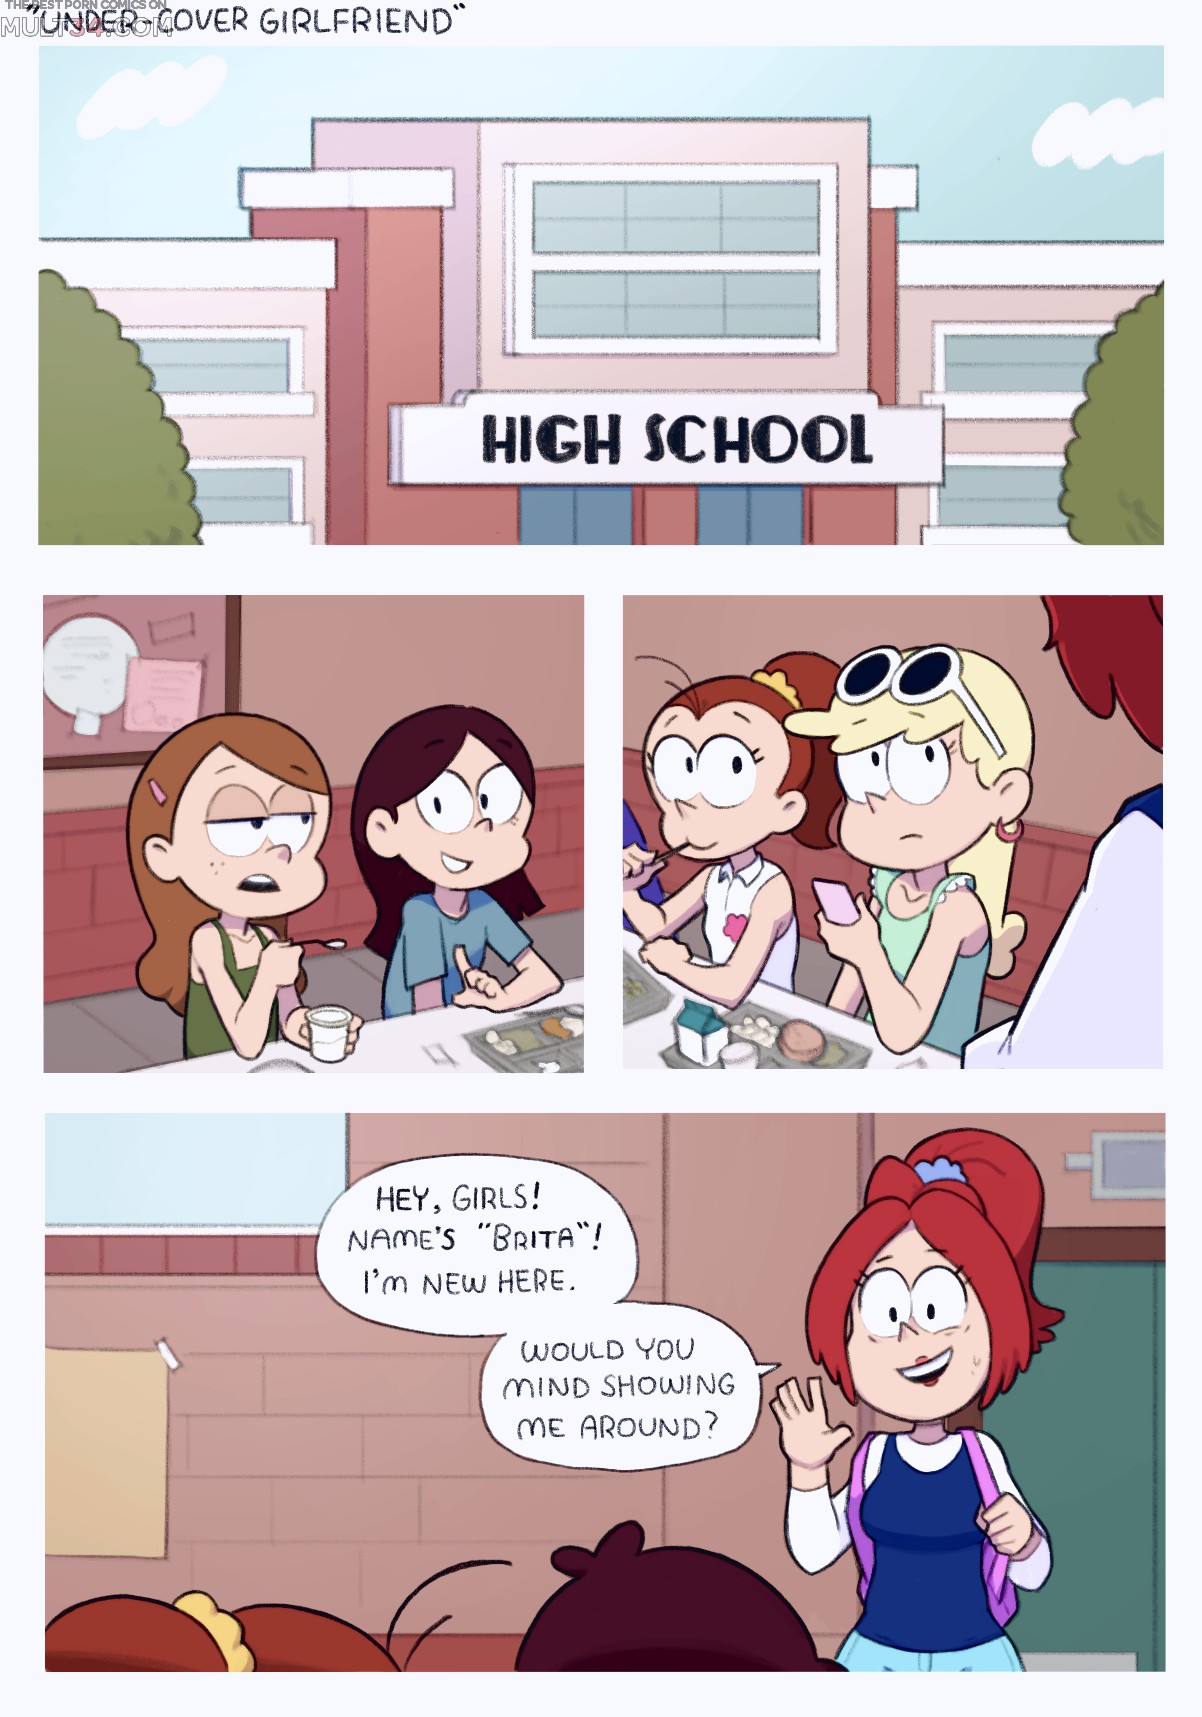 Undercover Girlfriend porn comic page 1 on category The Loud House